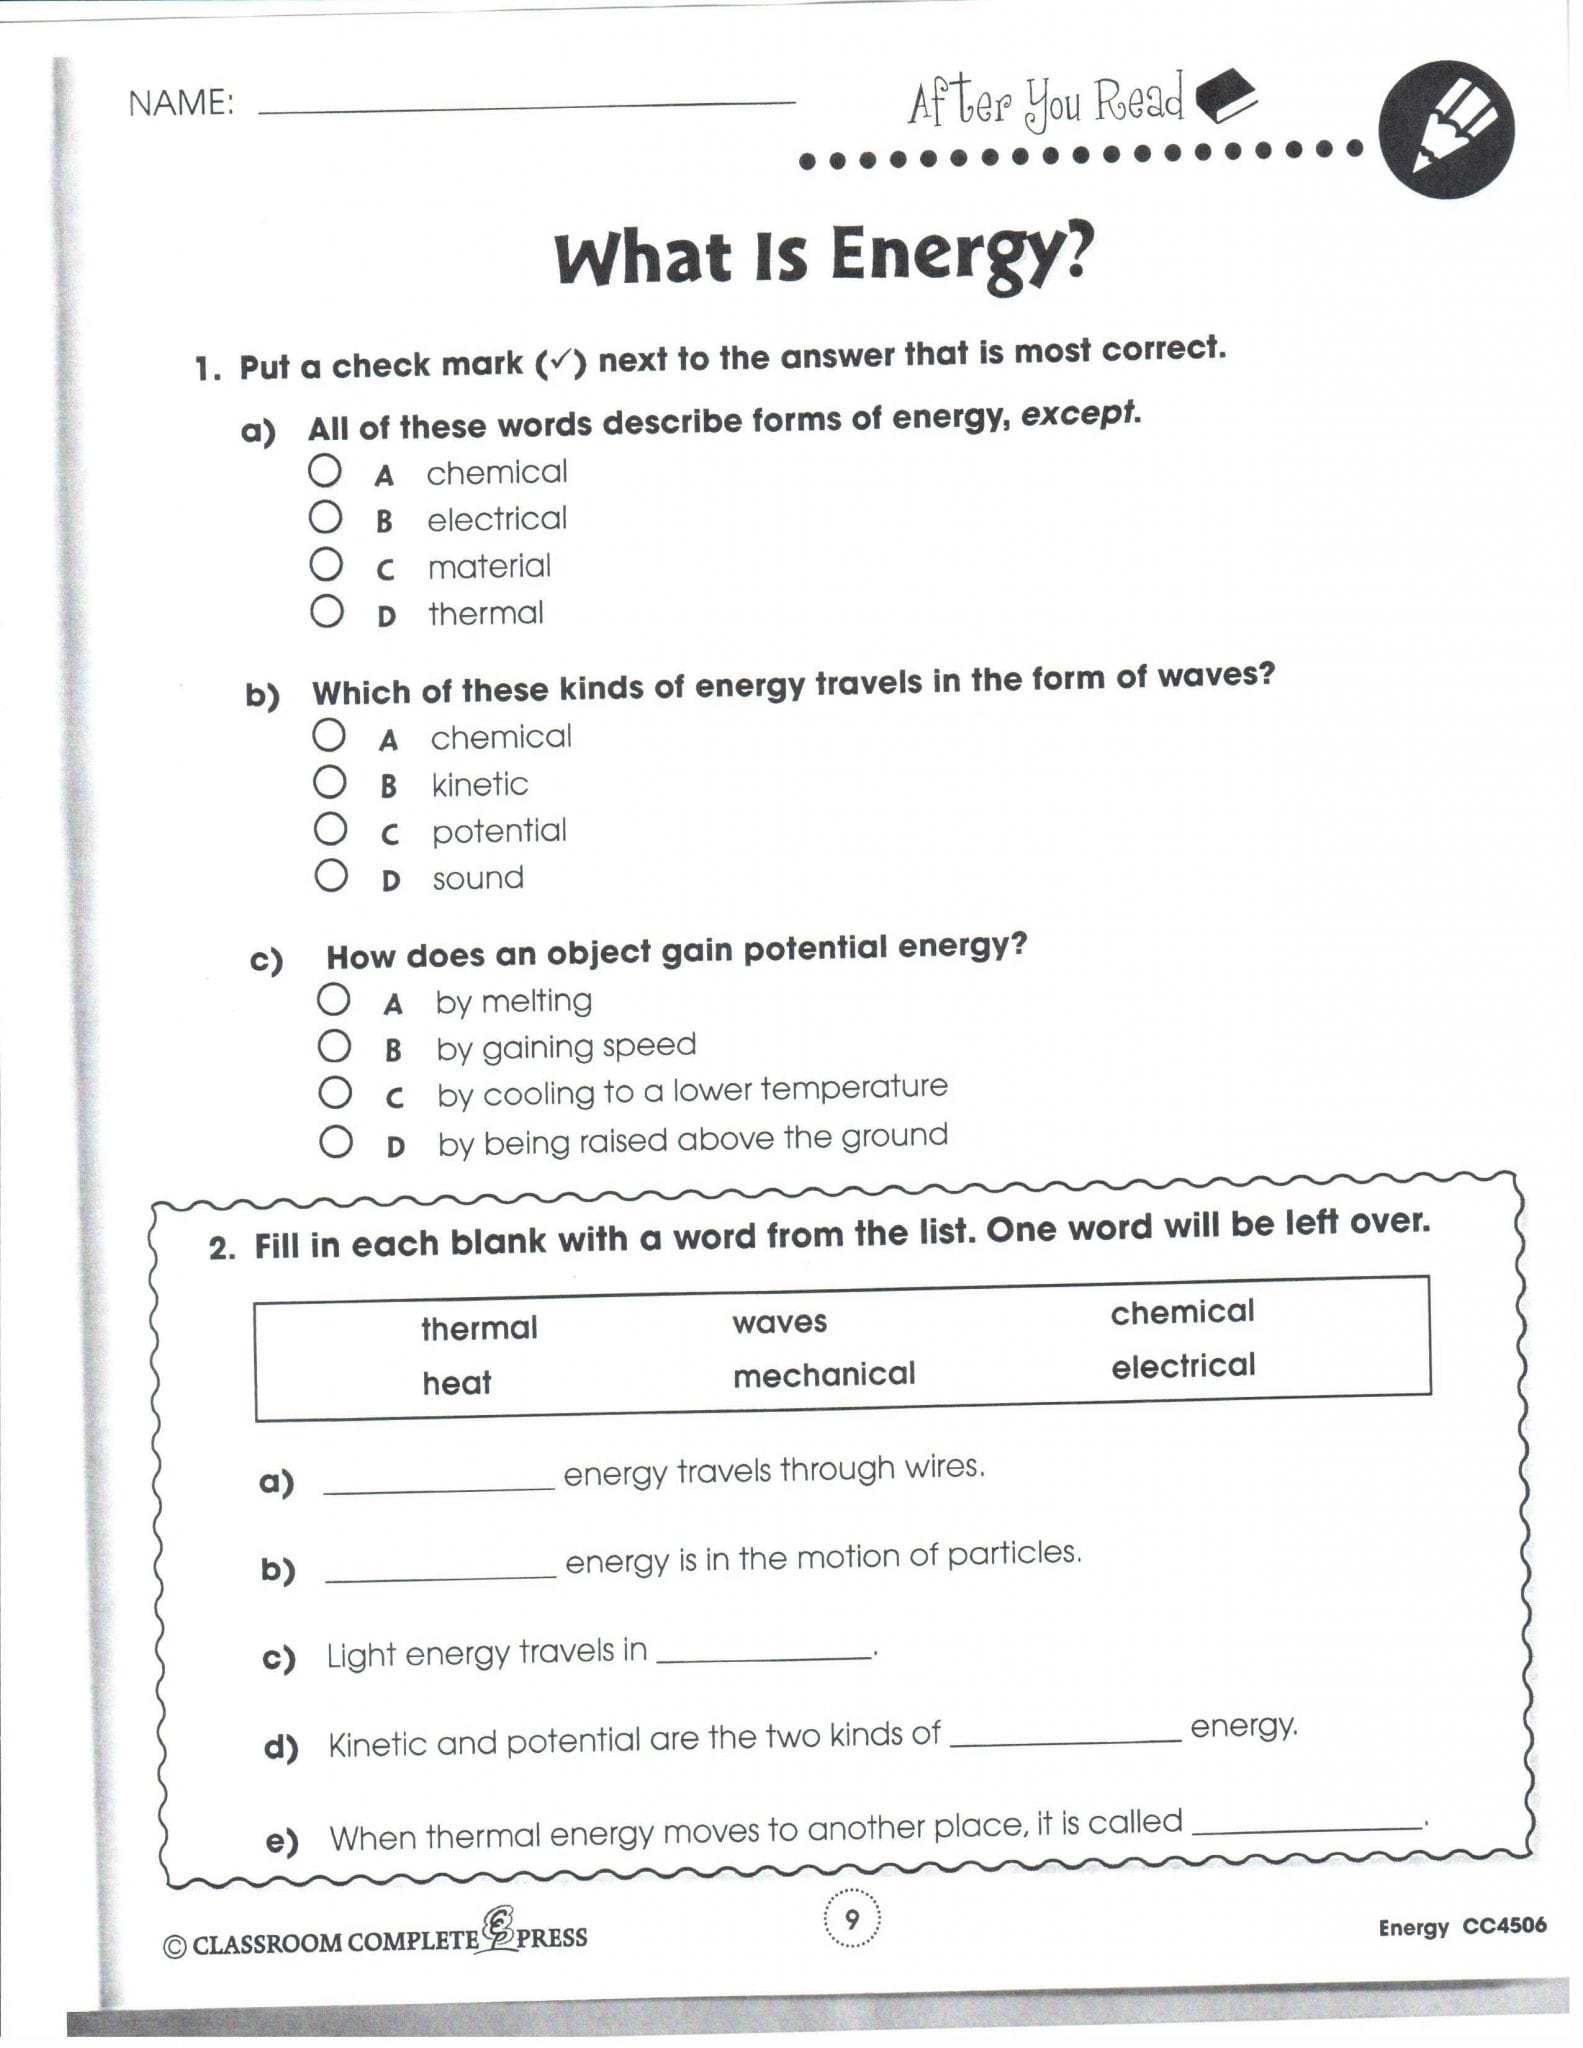 Bill Nye Pollution Solutions Worksheet Answers